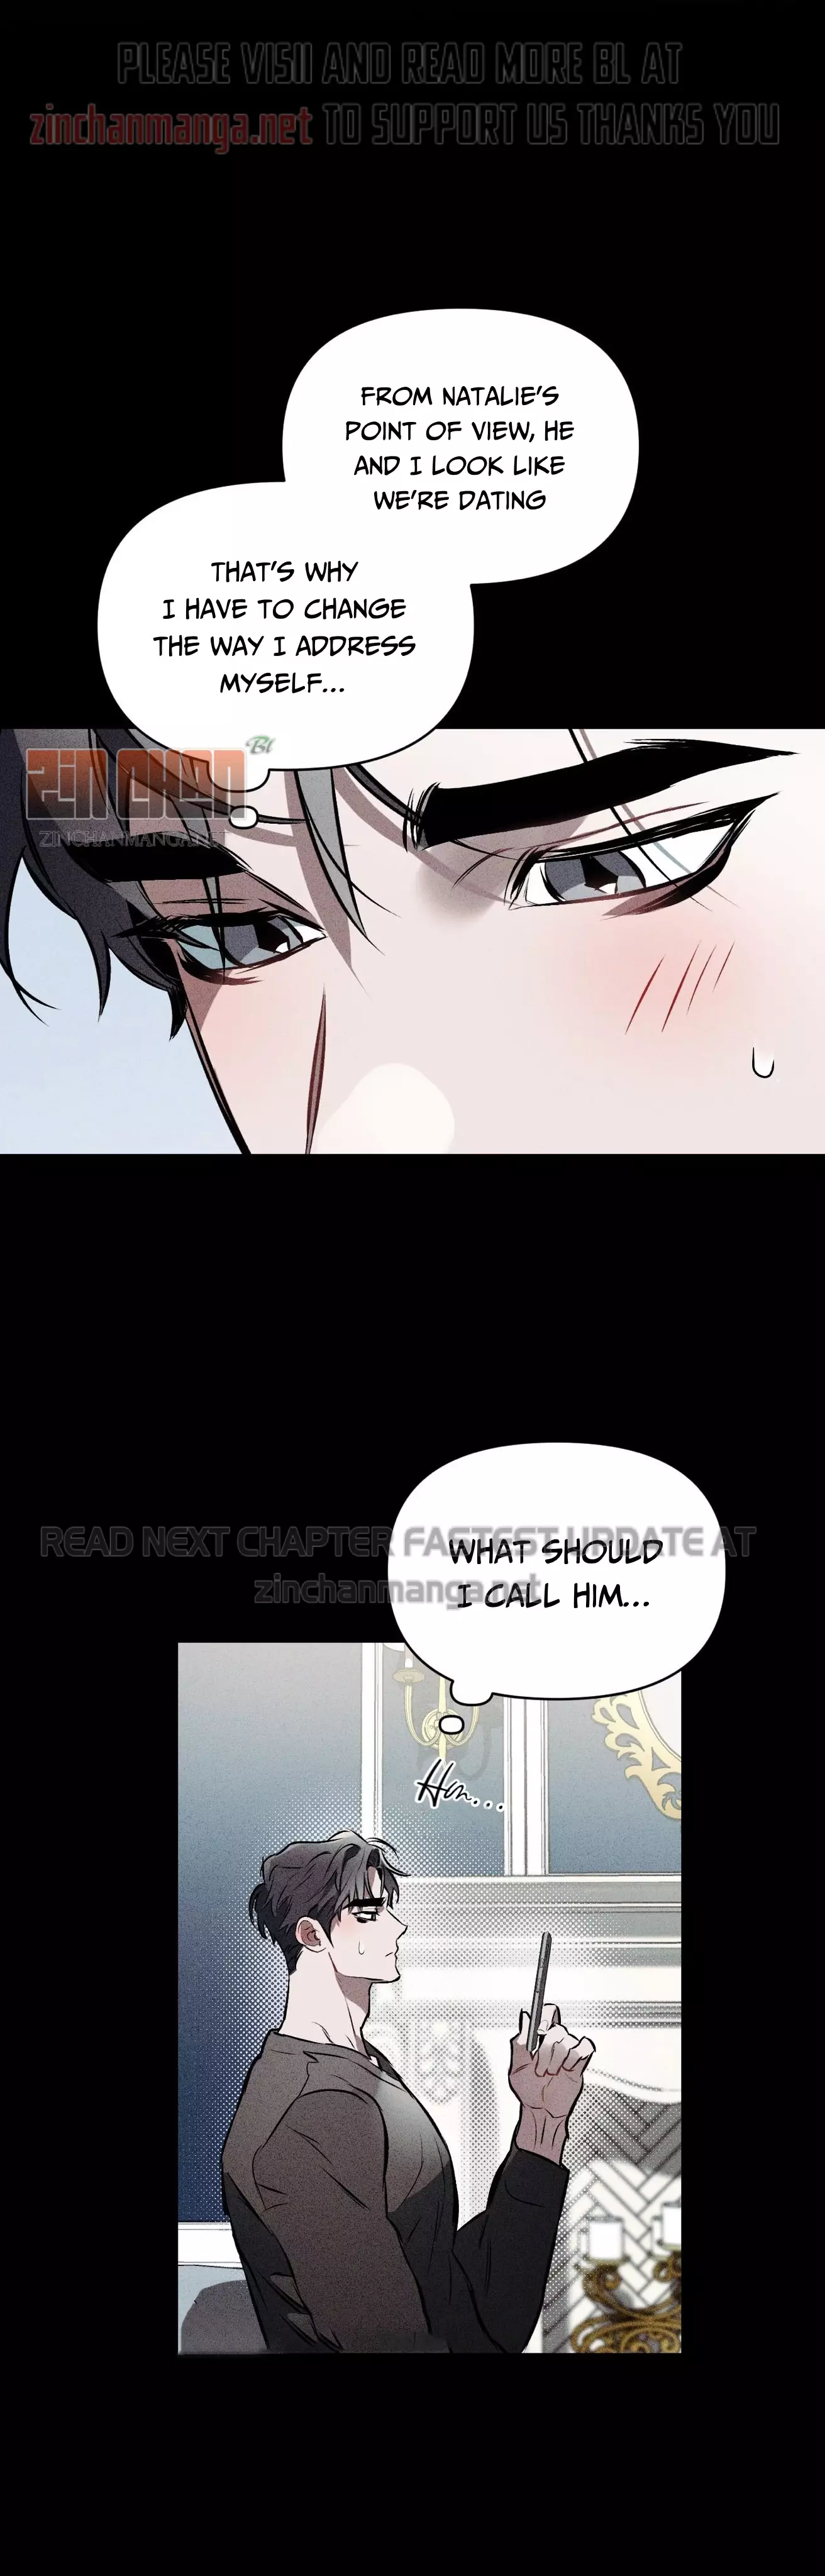 Define The Relationship (Yaoi) - 36 page 9-c9a07d3f